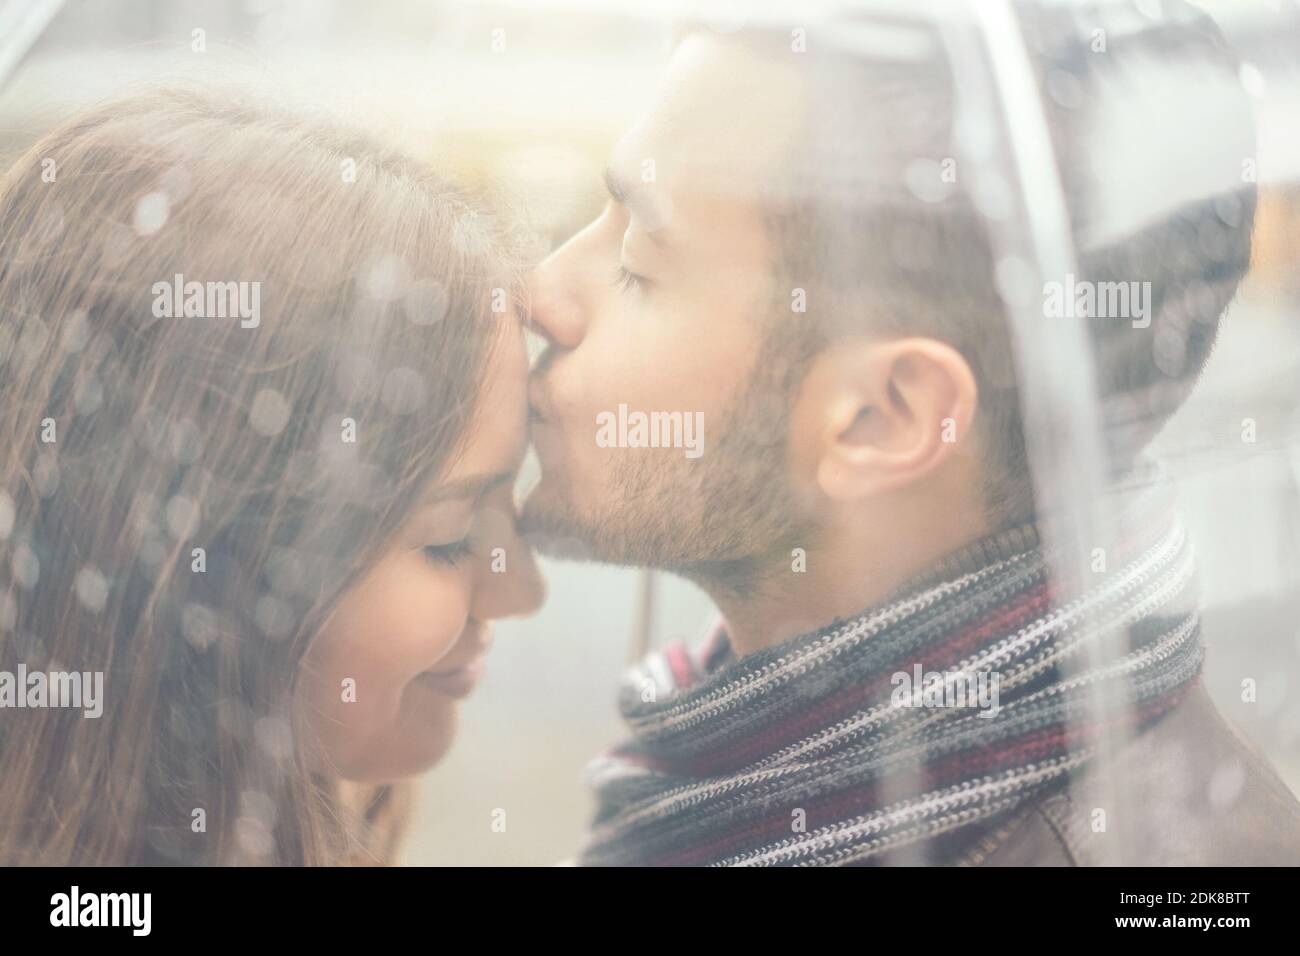 Featured image of post Rain Couple Lip Kiss Images / Free for commercial use no attribution required high quality images.